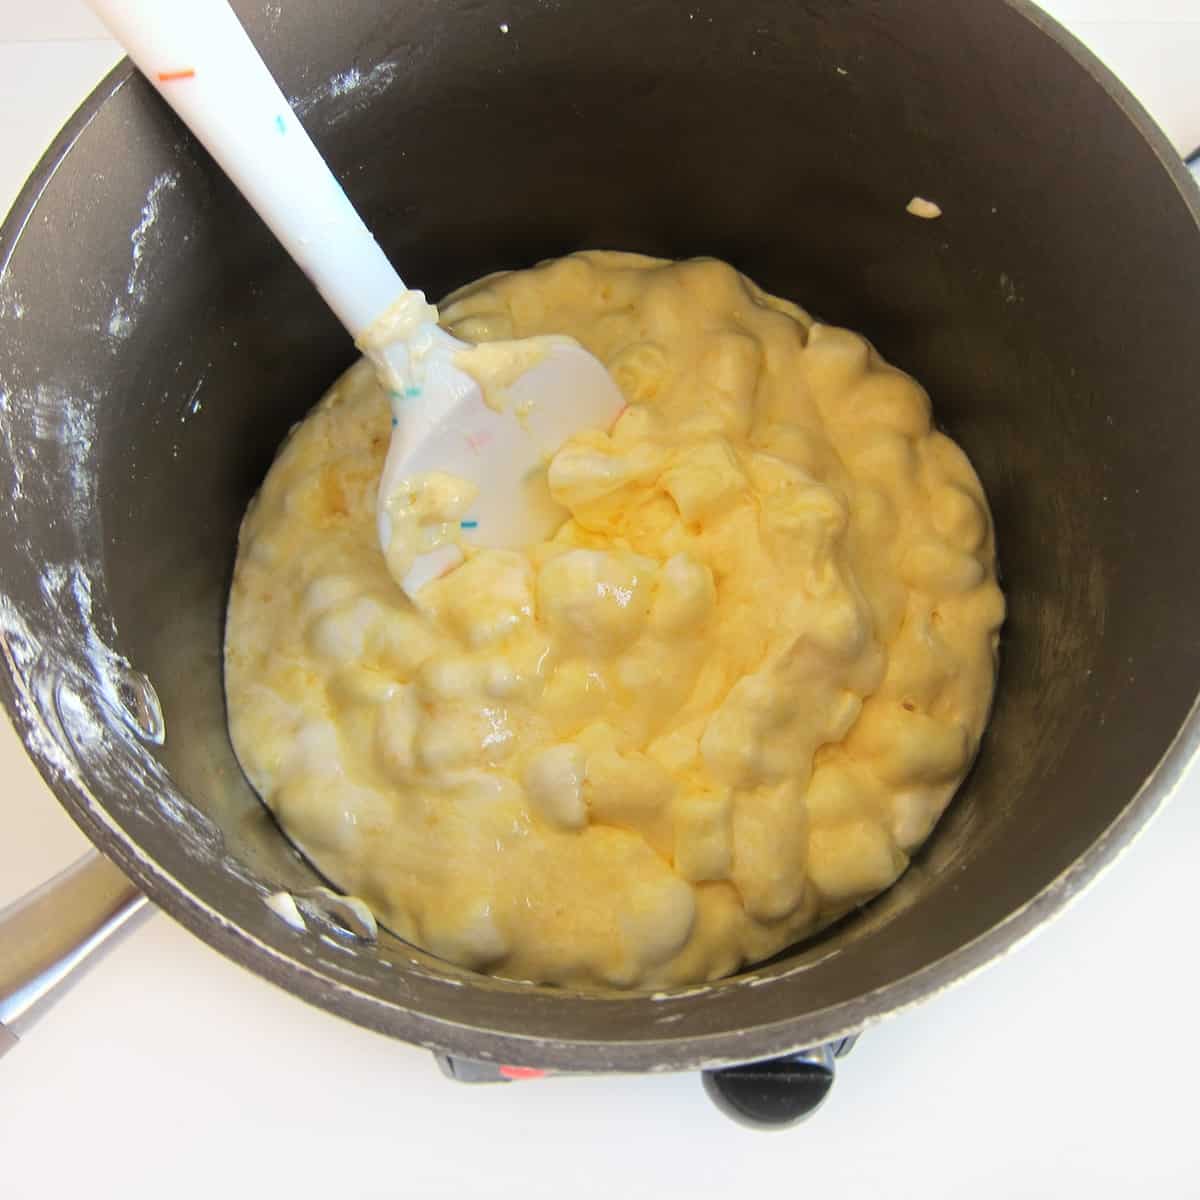 melting marshmallows and banana pudding mixed together with butter in a saucepan